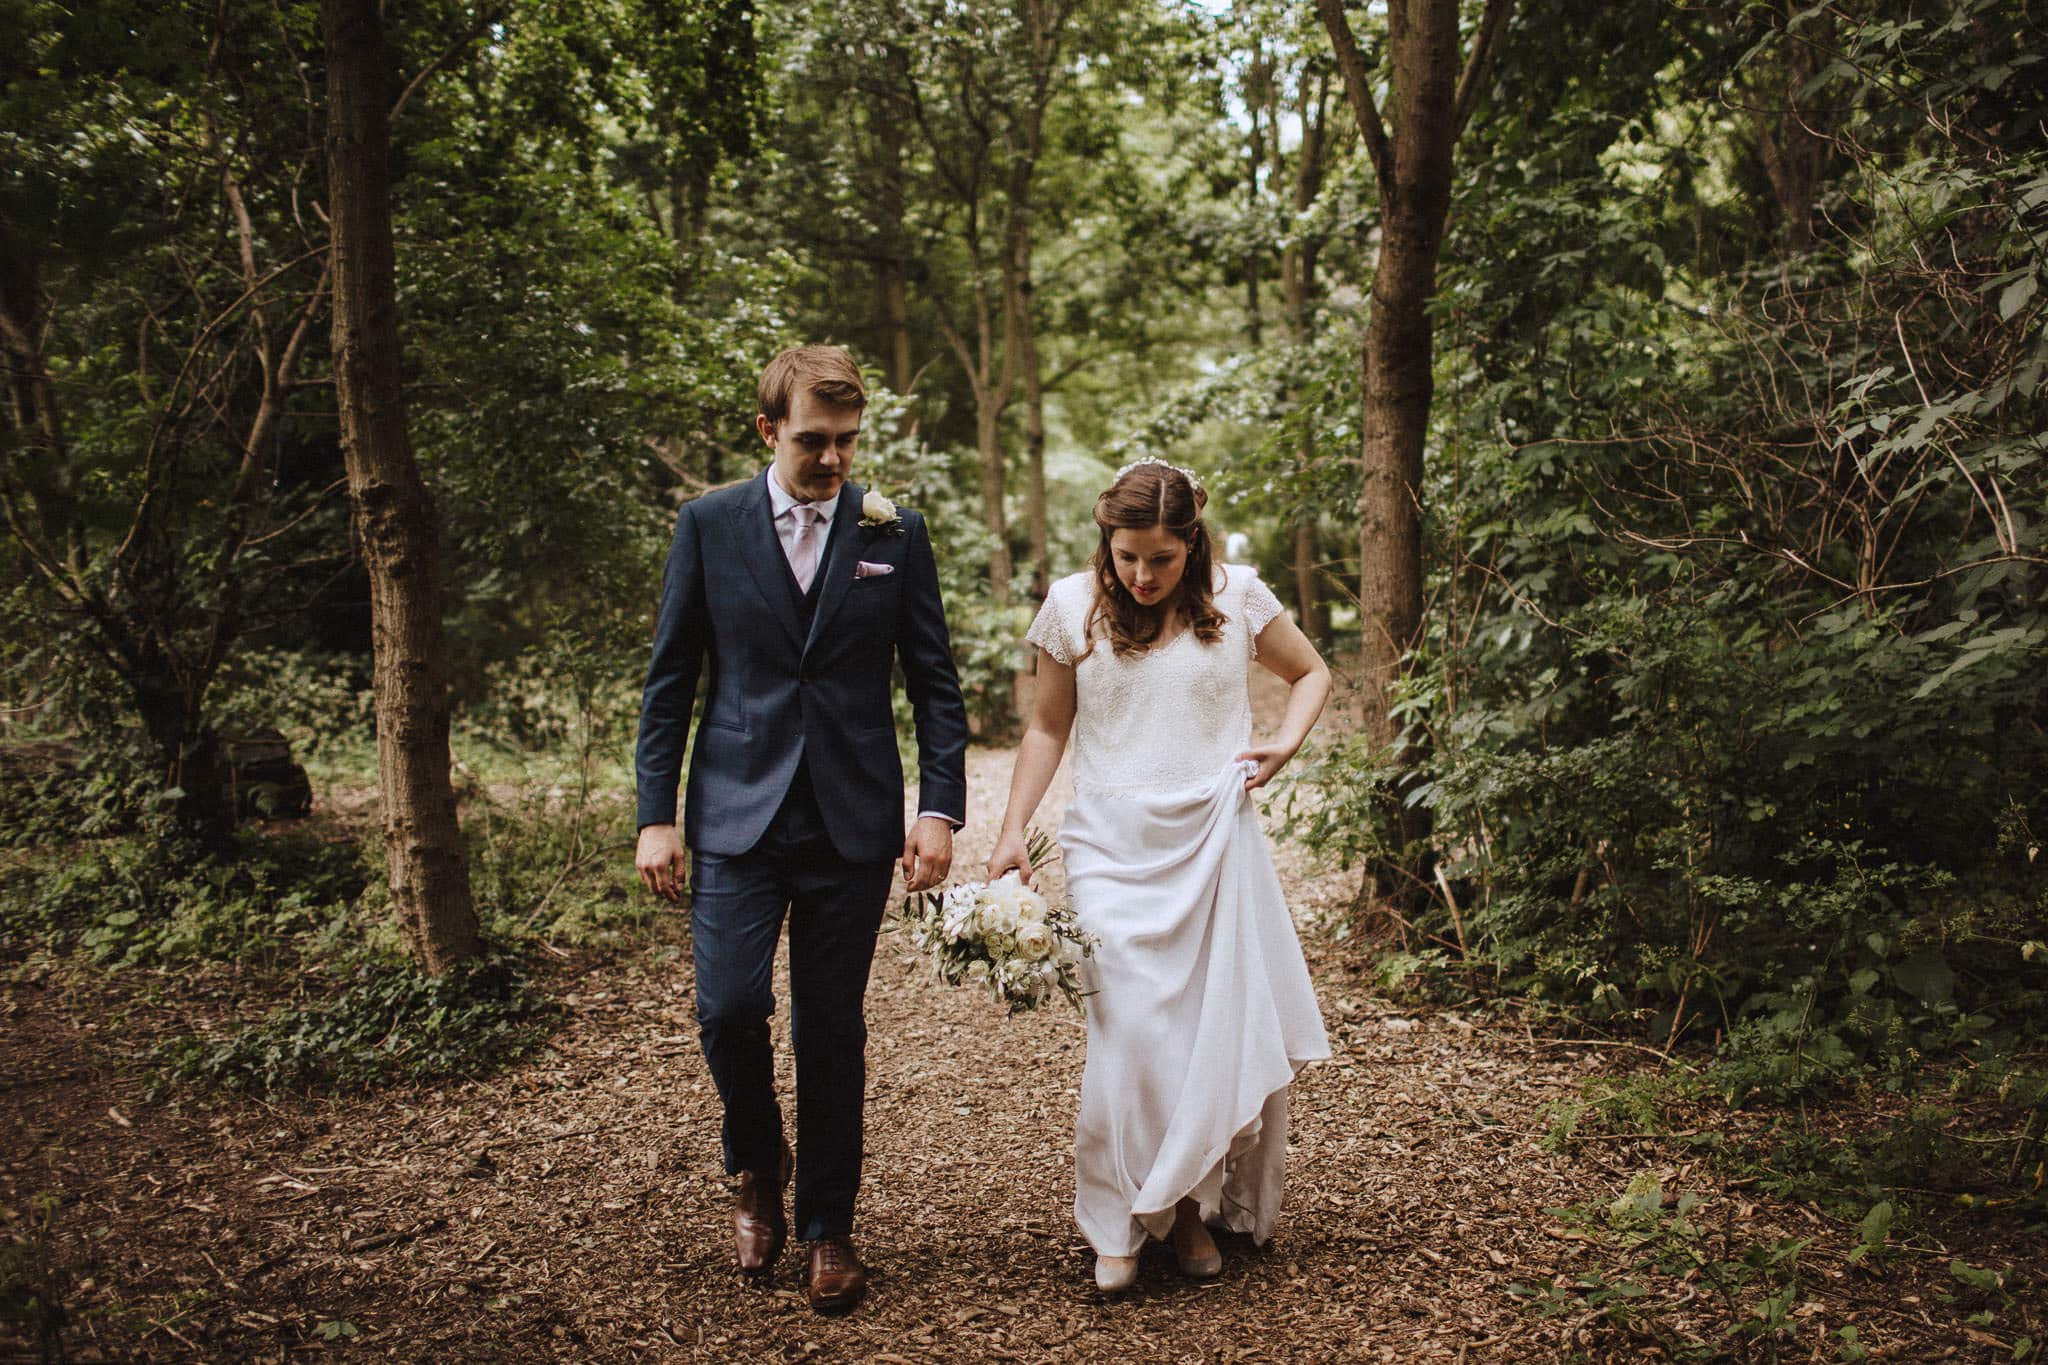 natural wedding portraits in the woods at West Bridgford, Nottingham